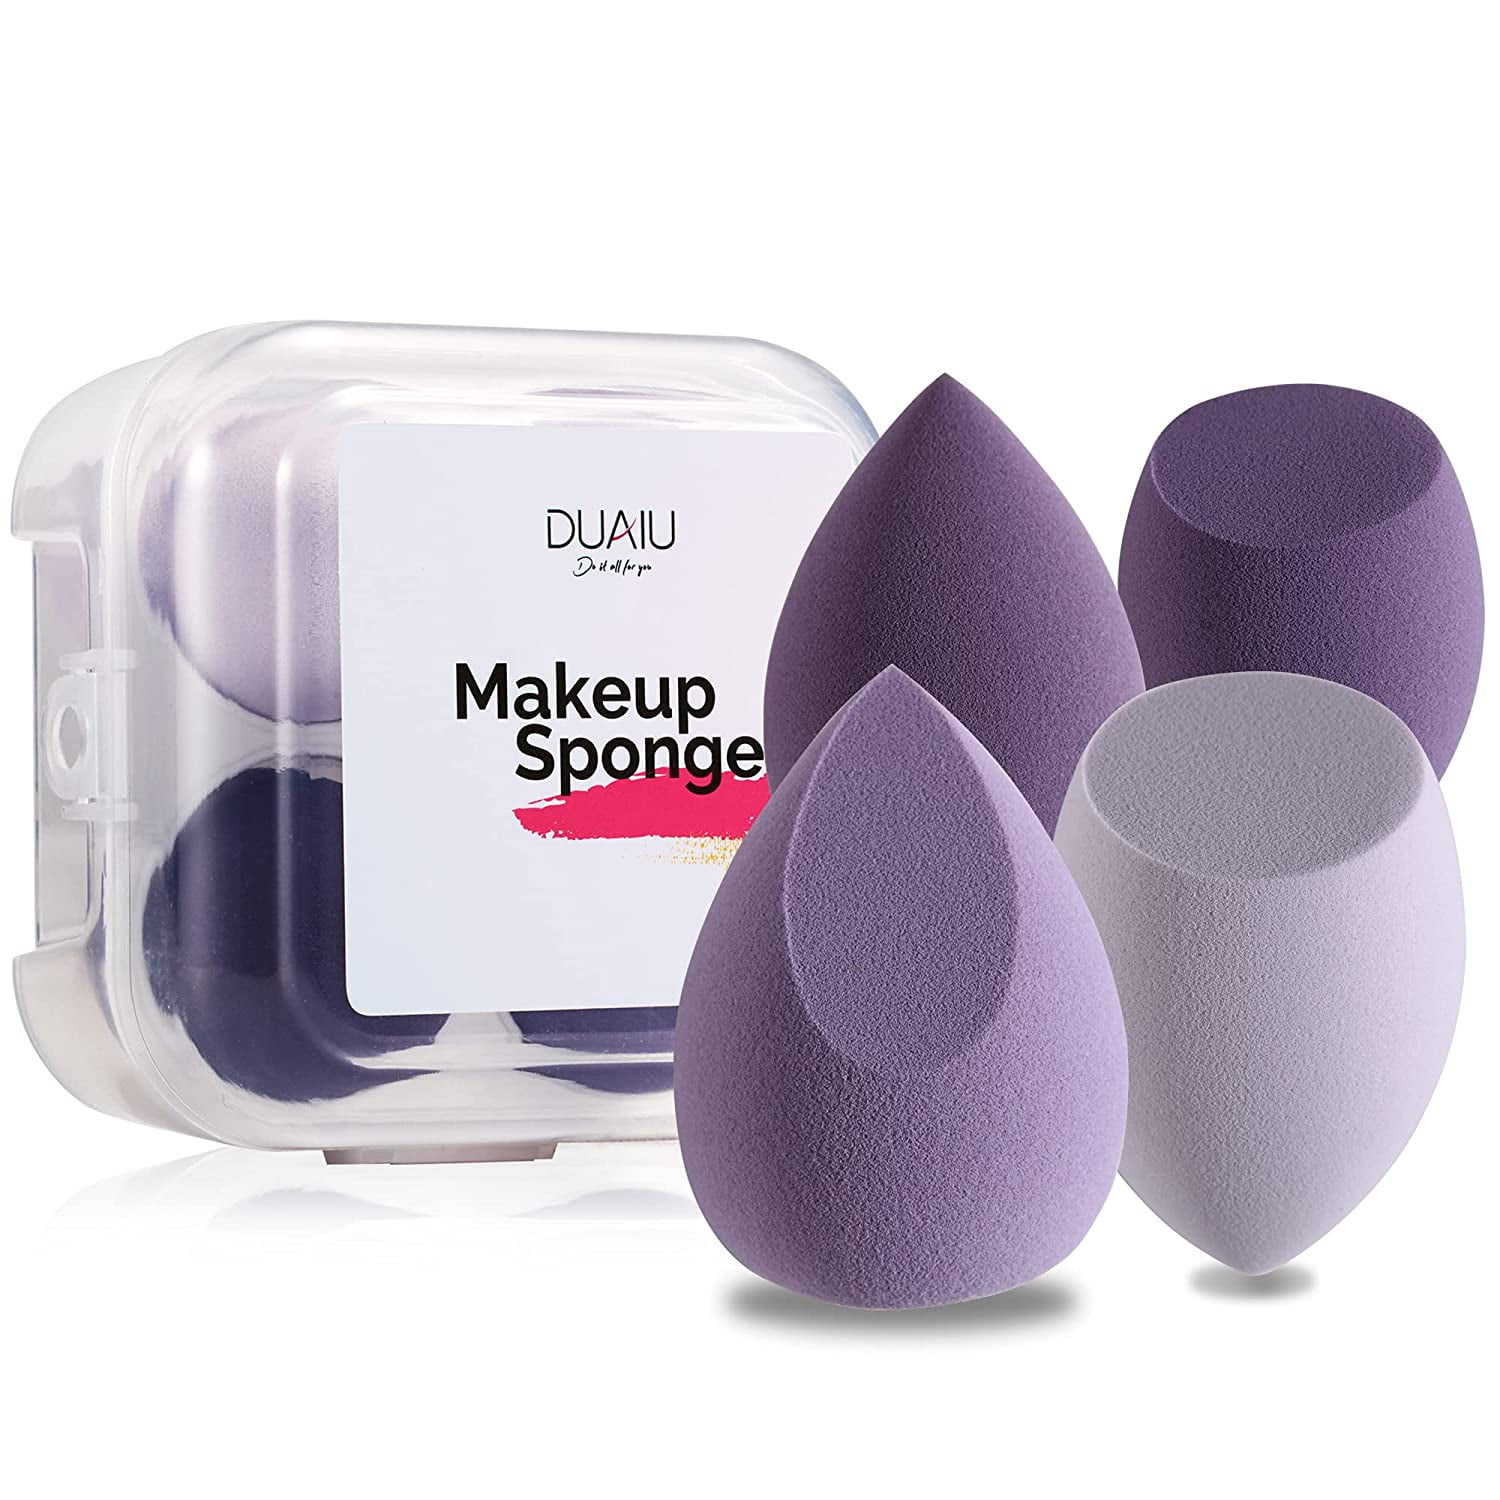 Your Ultimate Guide to Every Type of Makeup Sponge—and How to Use Them